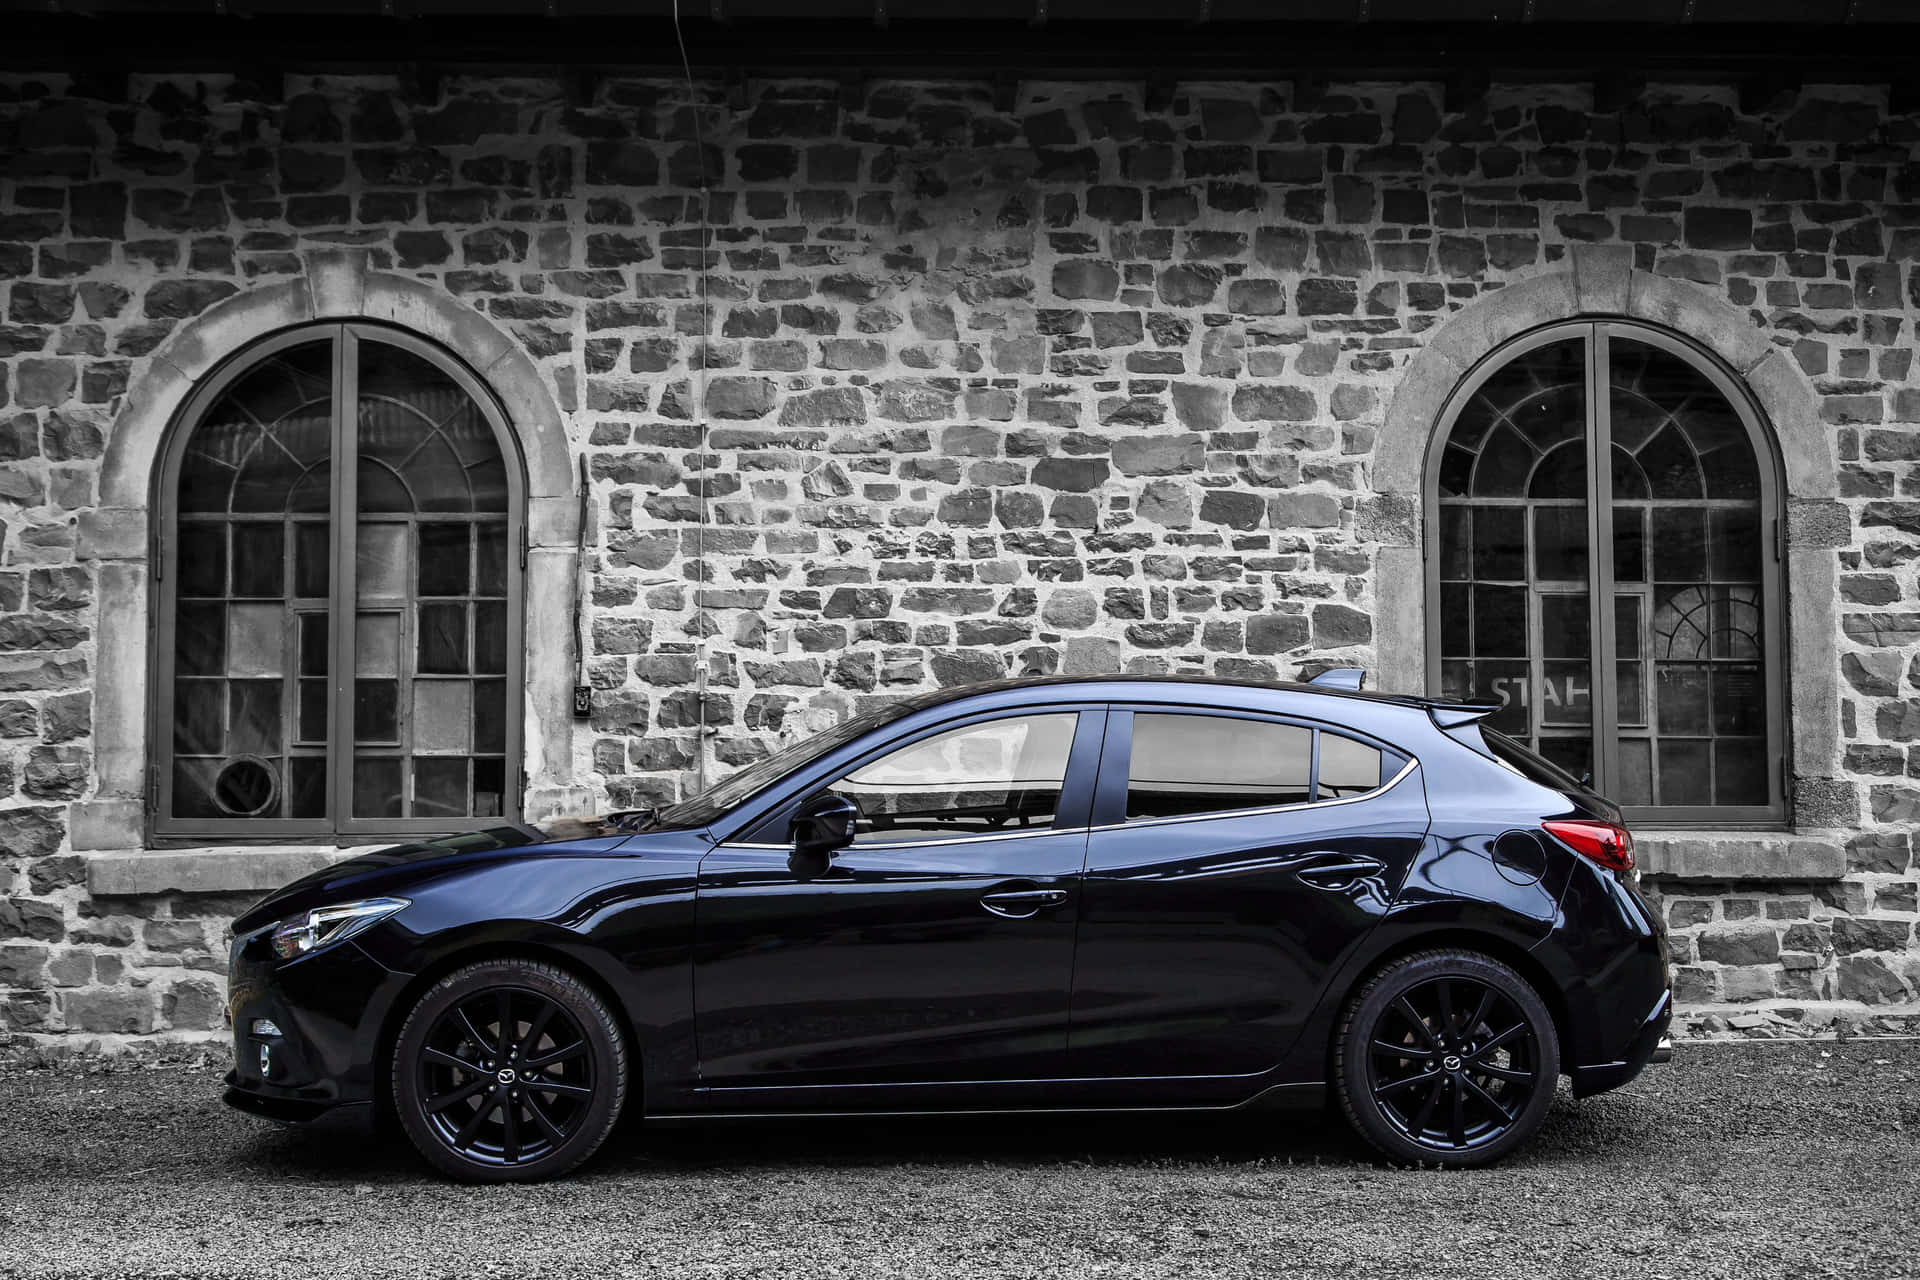 A Stylish Mazda 3 Hatchback In Spectacular Movement Wallpaper